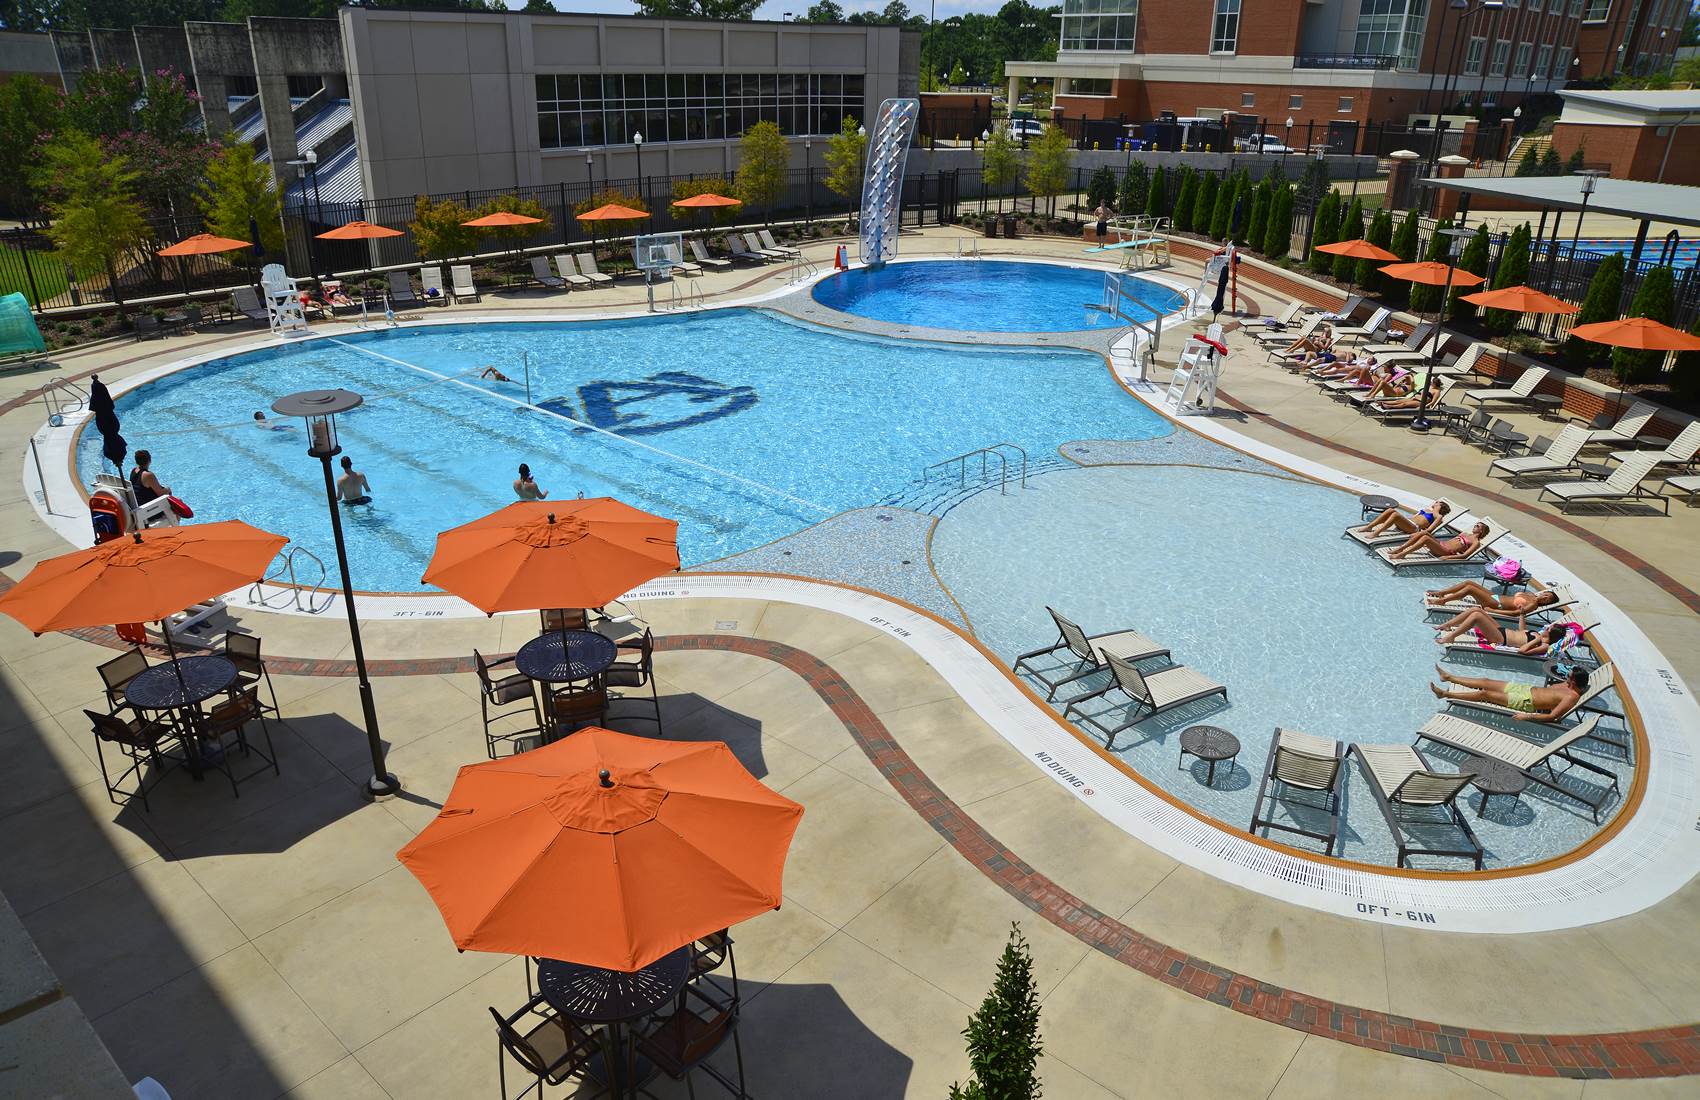 Pool at the Auburn University Recreation and Wellness Center